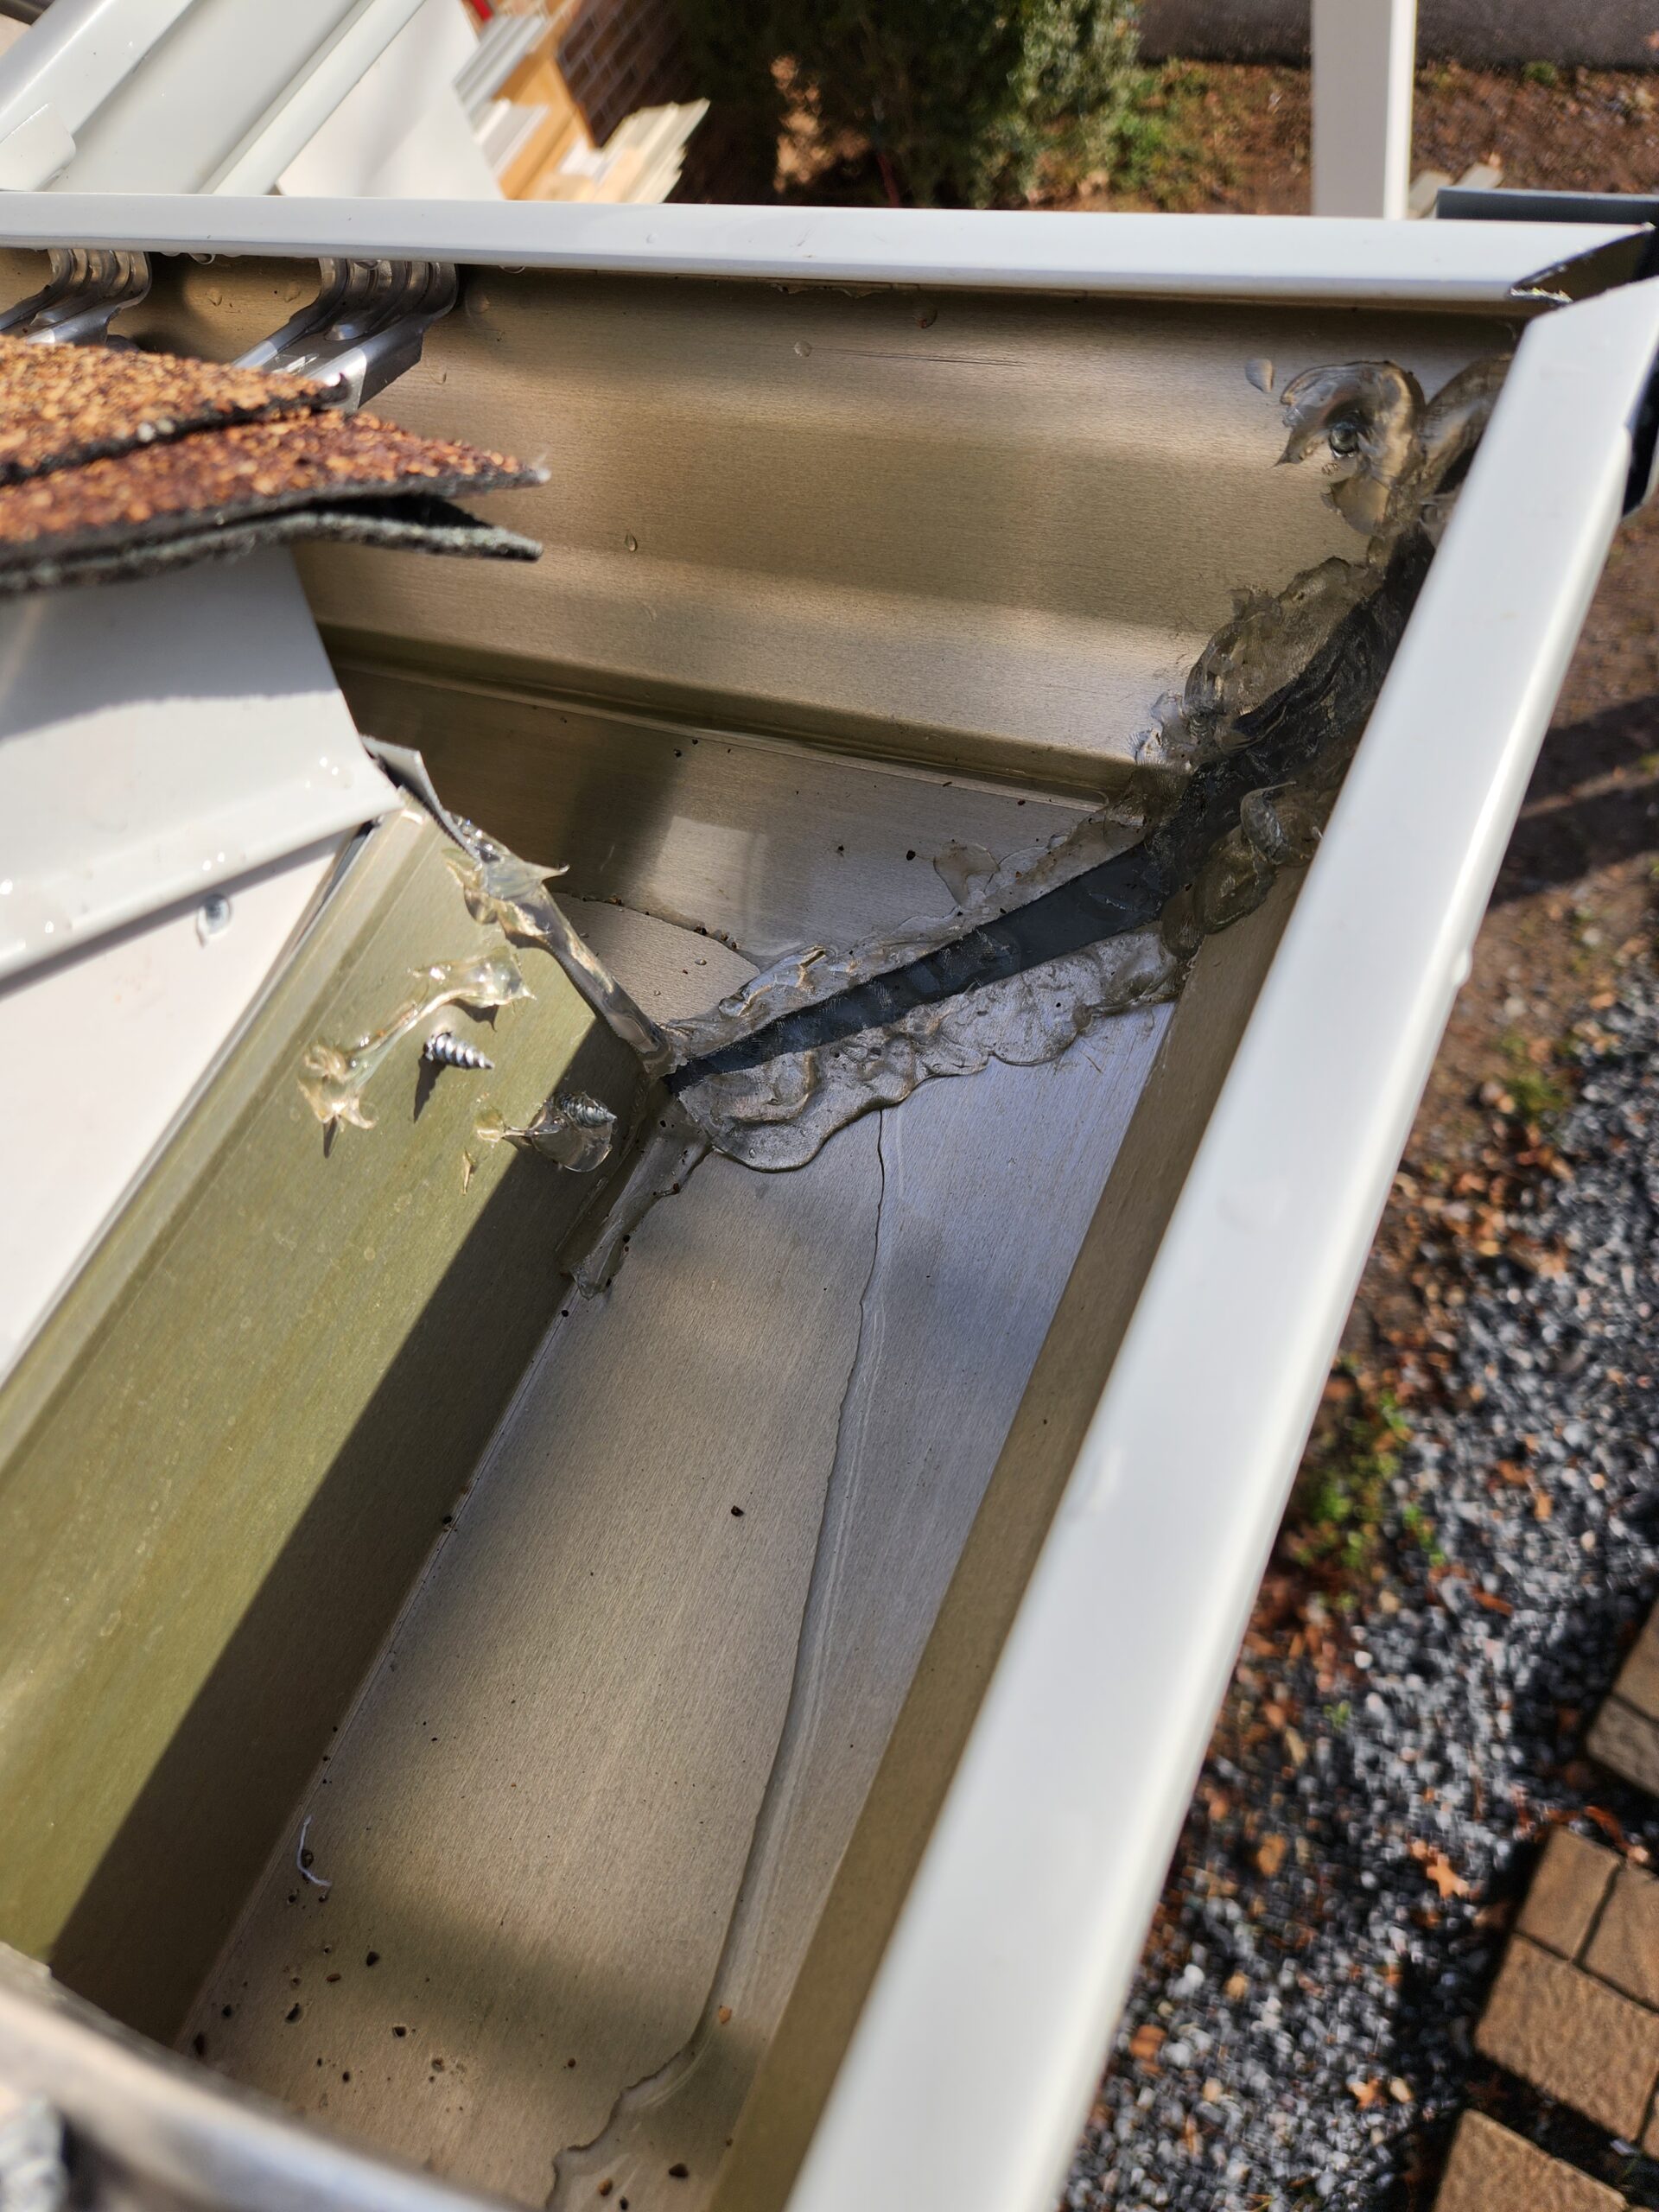 gutter slope issues cause water to collect in gutter corner